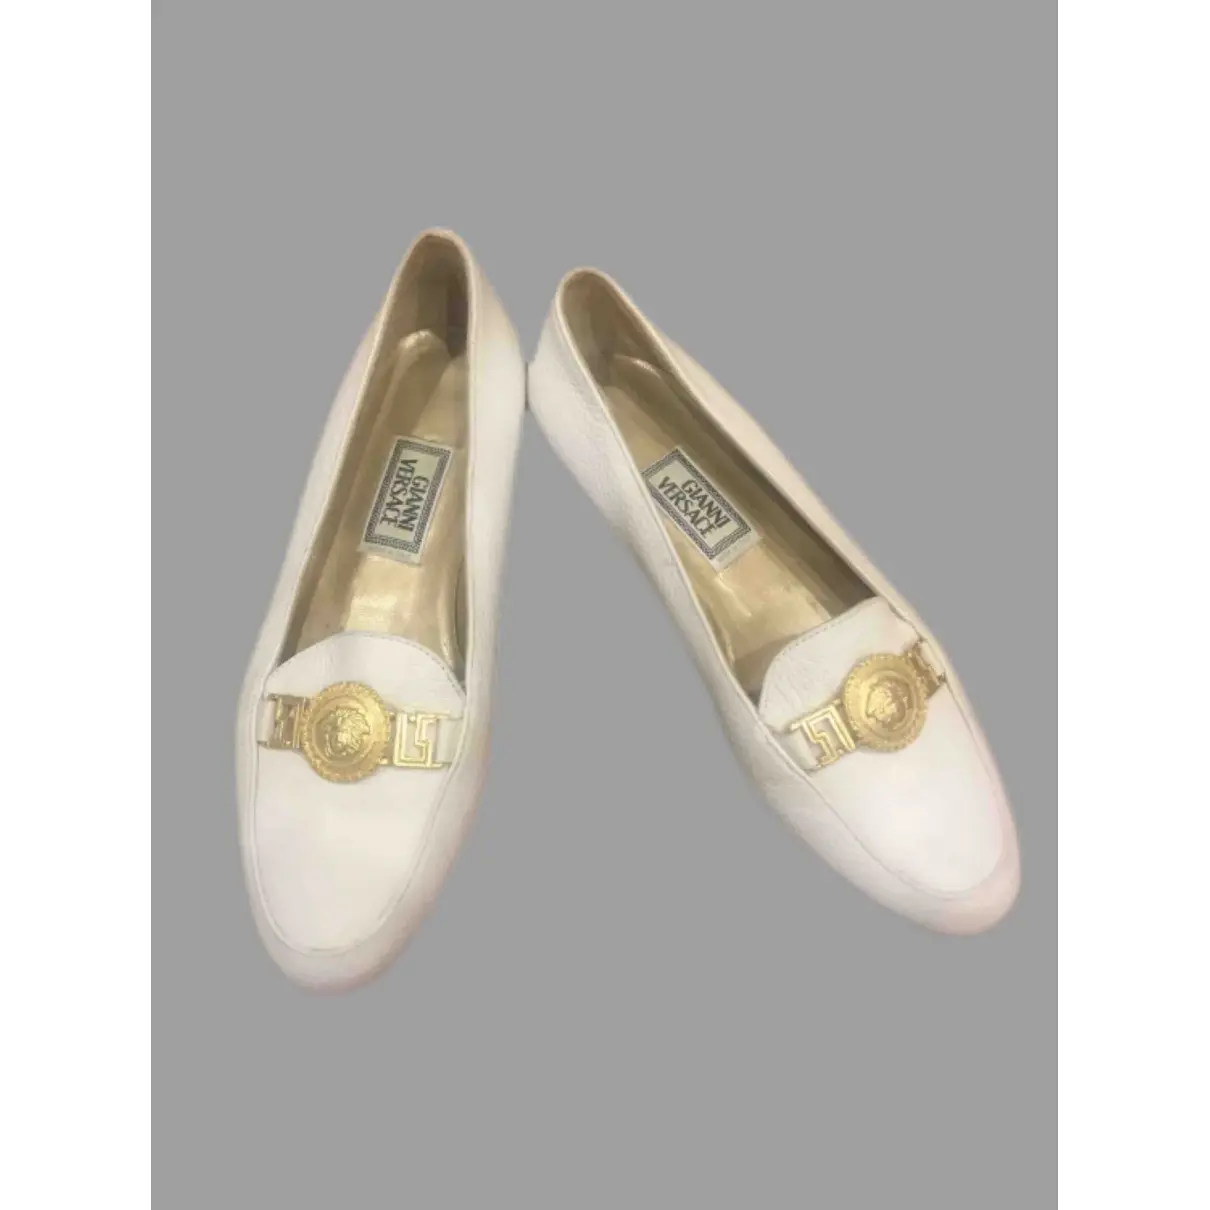 Buy Gianni Versace Leather flats online - Vintage